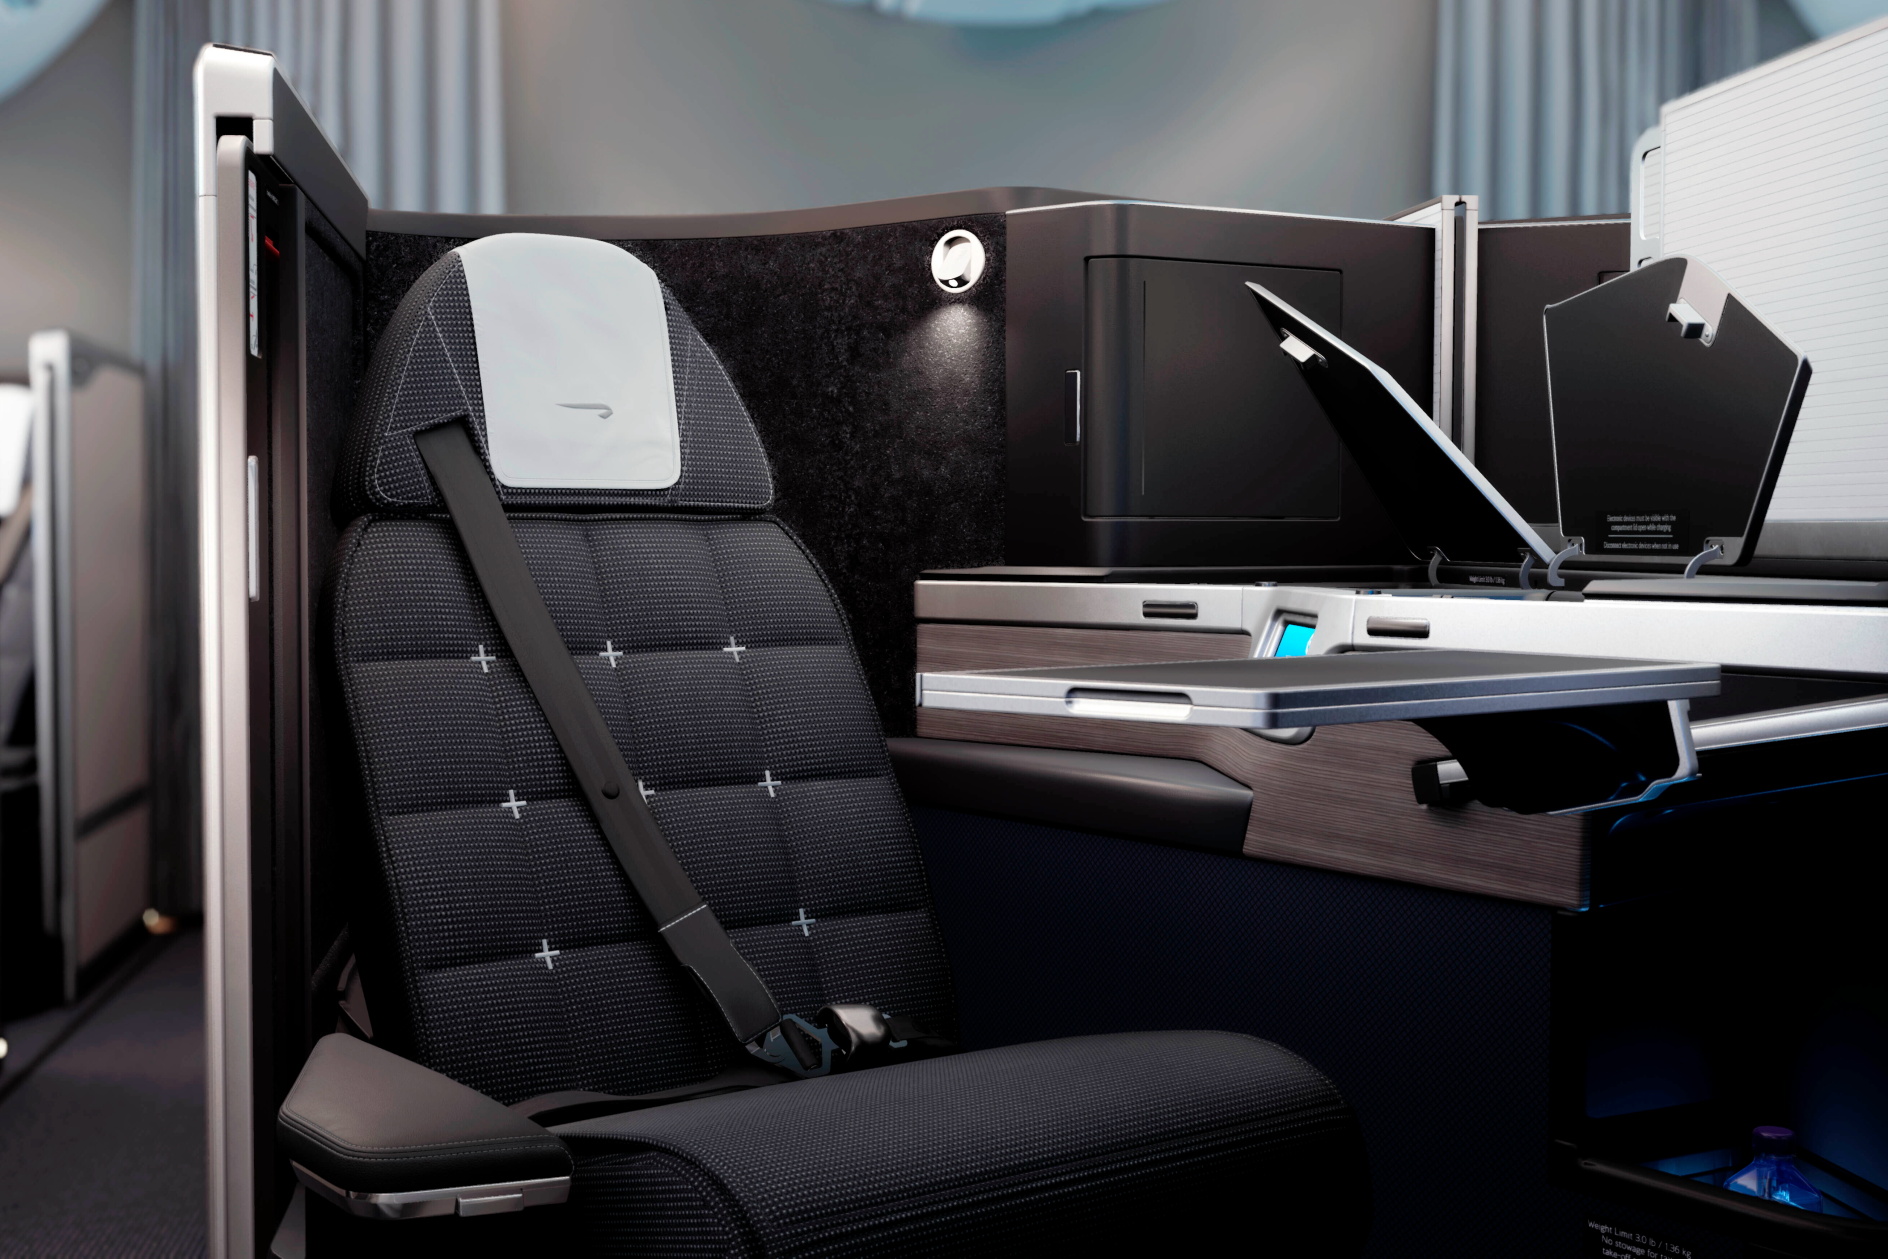 British Airways continues to retrofit its newest business class seat - the Club Suite - across its Boeing 777 fleet, with the roll out expected to be completed by the end of 2022. Click to enlarge.